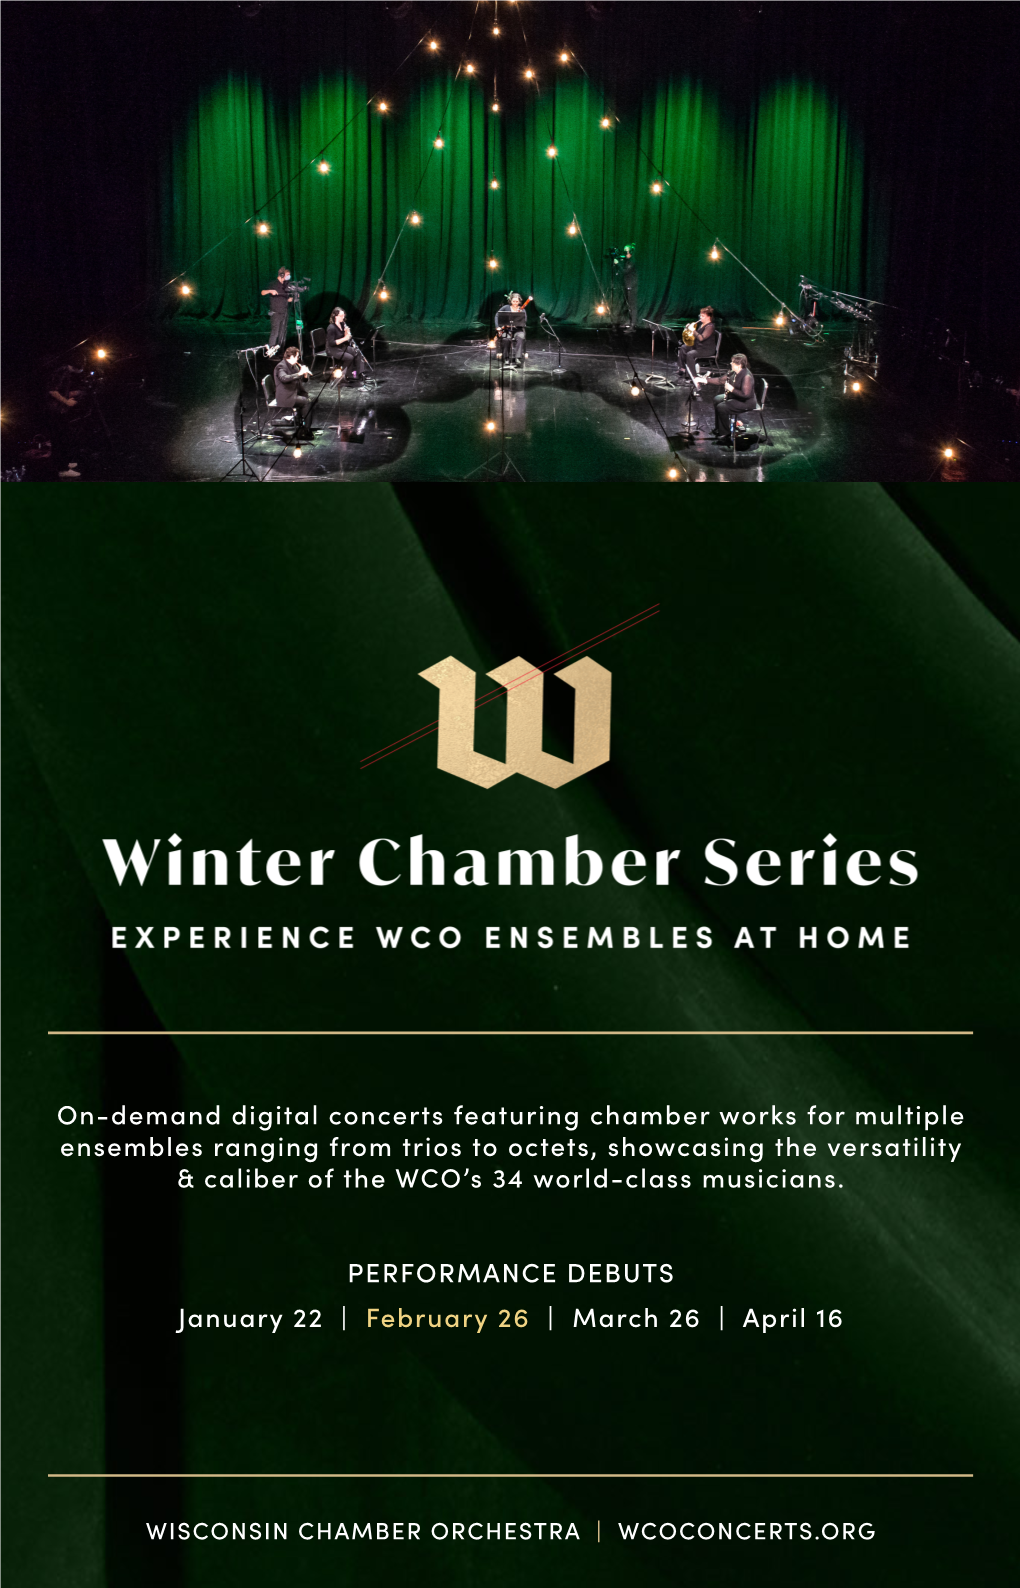 On-Demand Digital Concerts Featuring